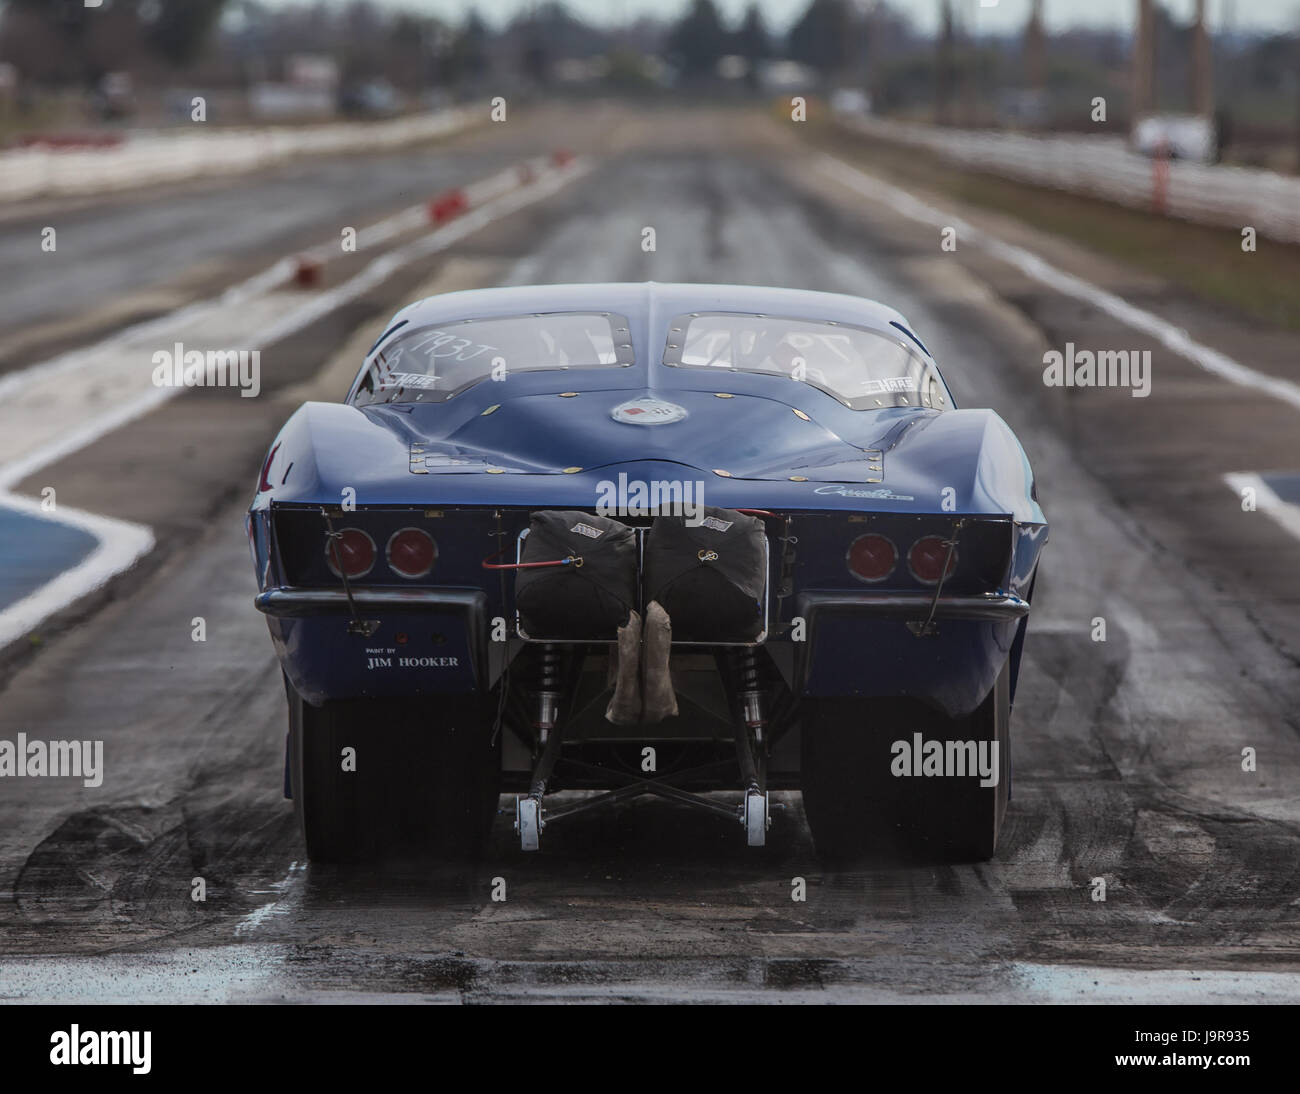 Hot rod at the Redding Drag Strip in Northern California. Stock Photo